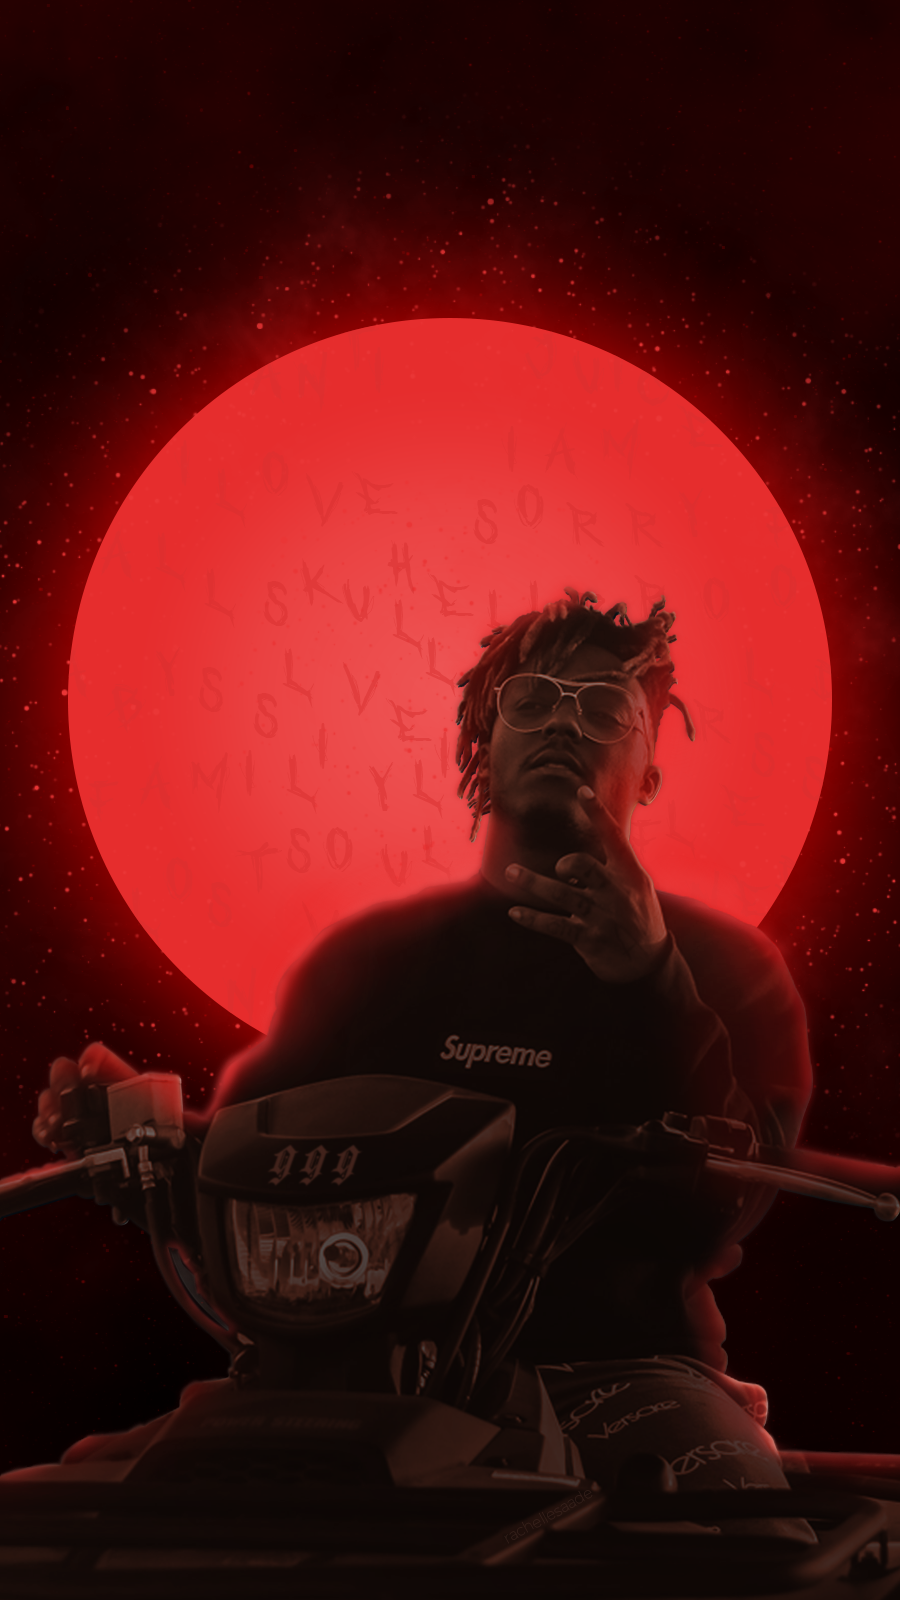 i made this juice wrld wallpaper edit and thought I'd share it with you here ❤️ 999 forever